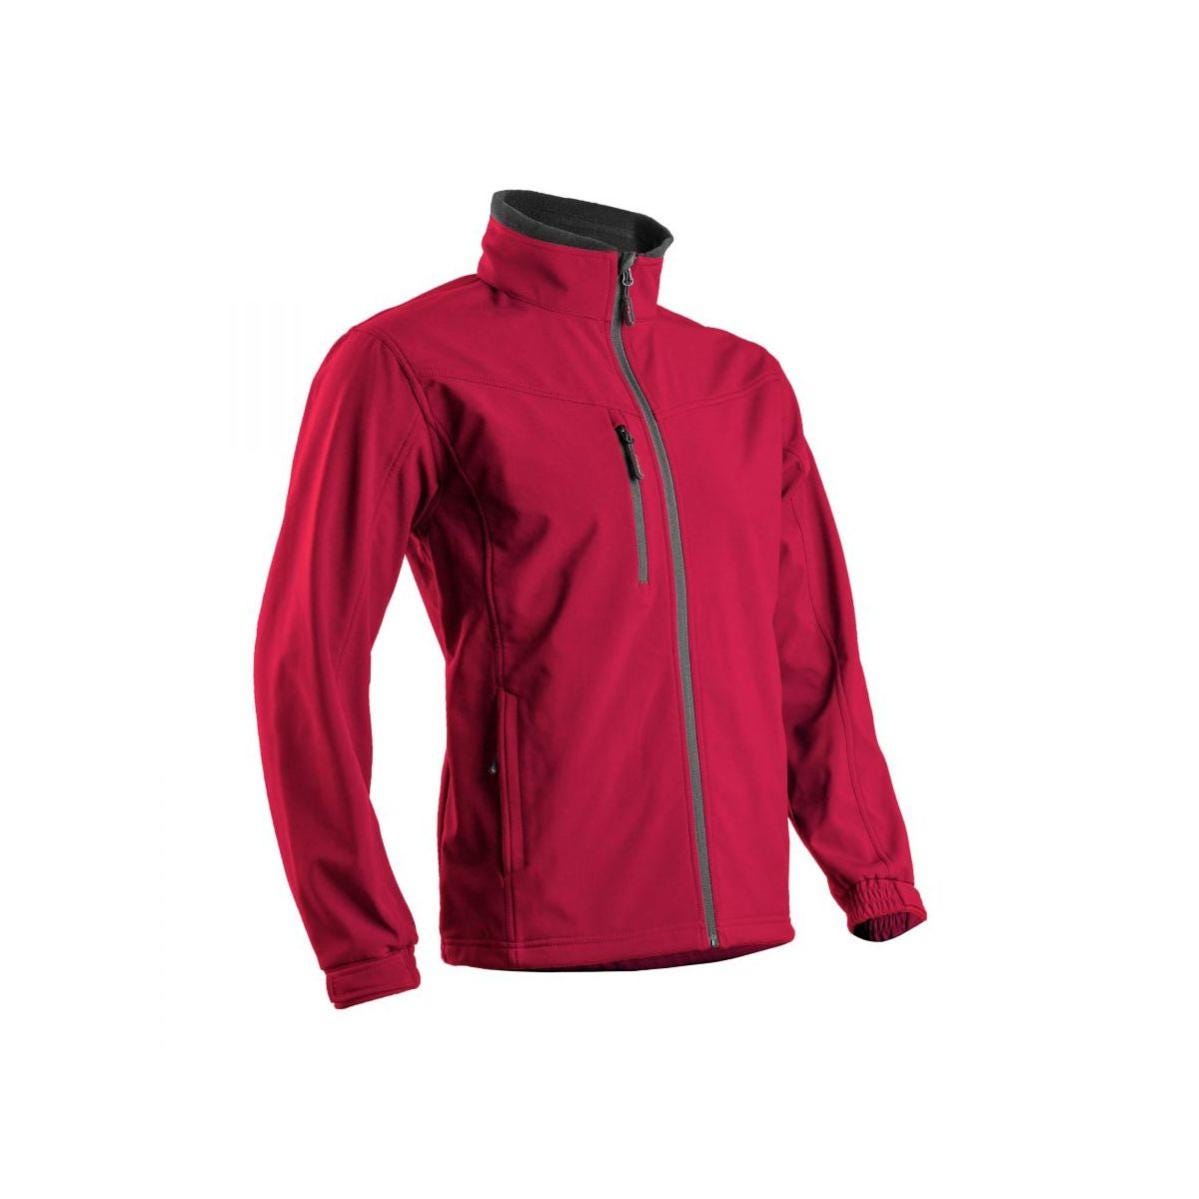 Veste softshell YANG II Rouge - Coverguard - Taille S 0